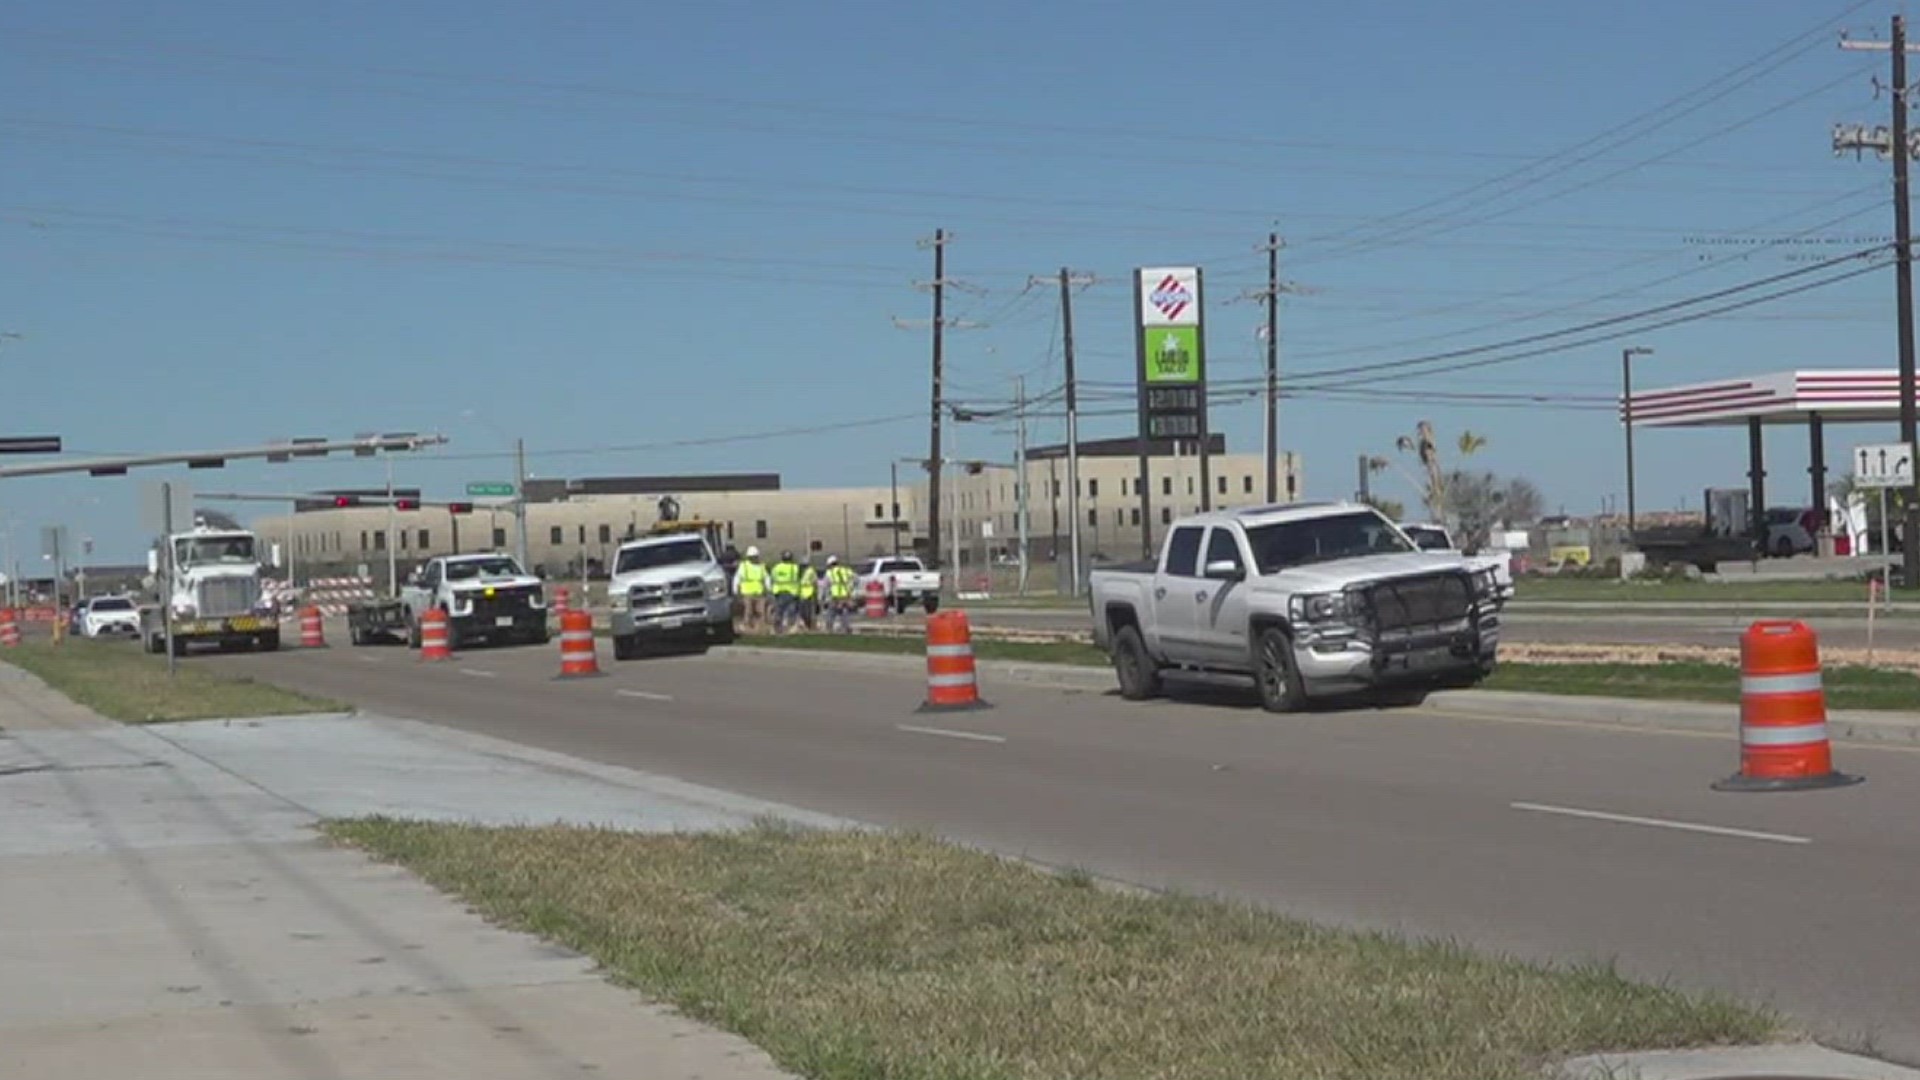 Many, including City officials, are concerned the construction will not be complete by the time the two new CCISD schools being built in that area are open.